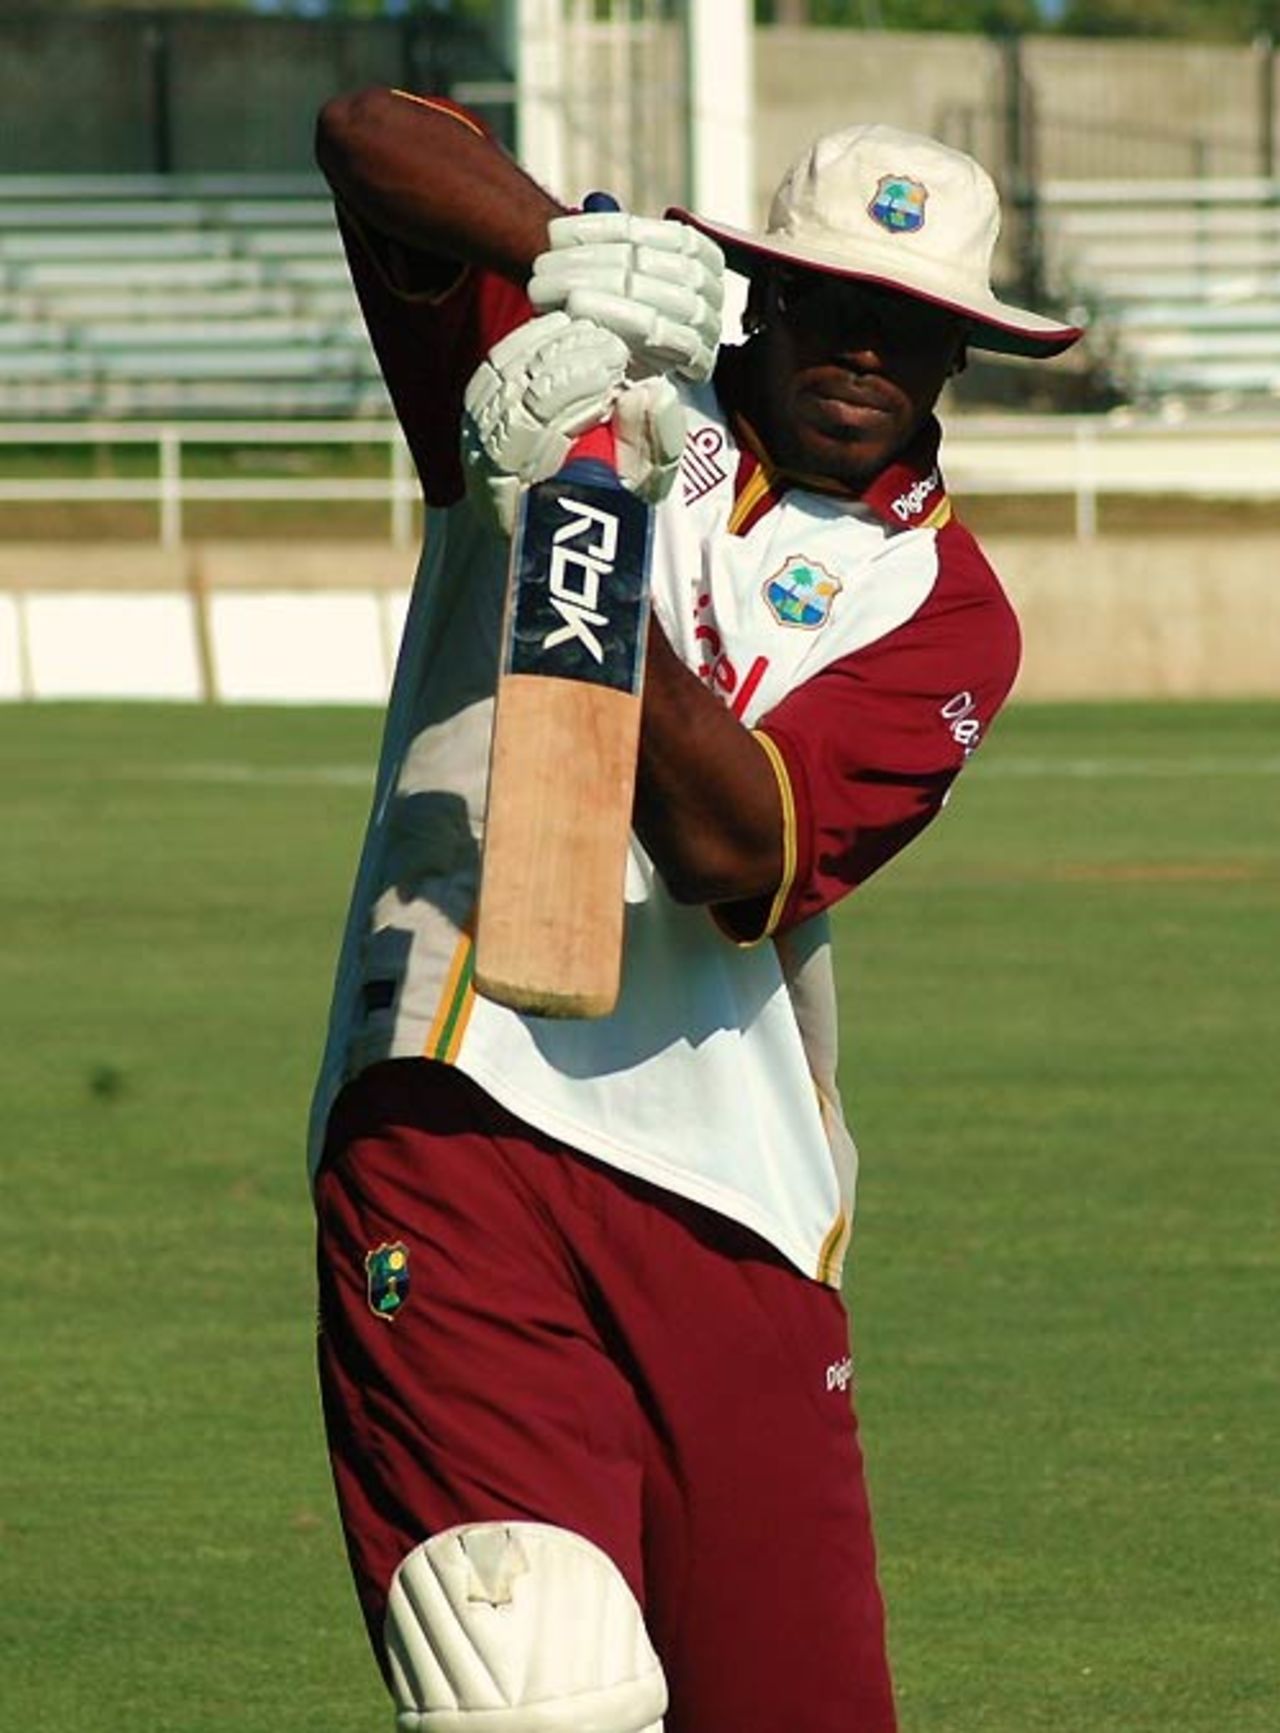 Chris Gayle has a batting session on the outfield, Kingston, May 19, 2008